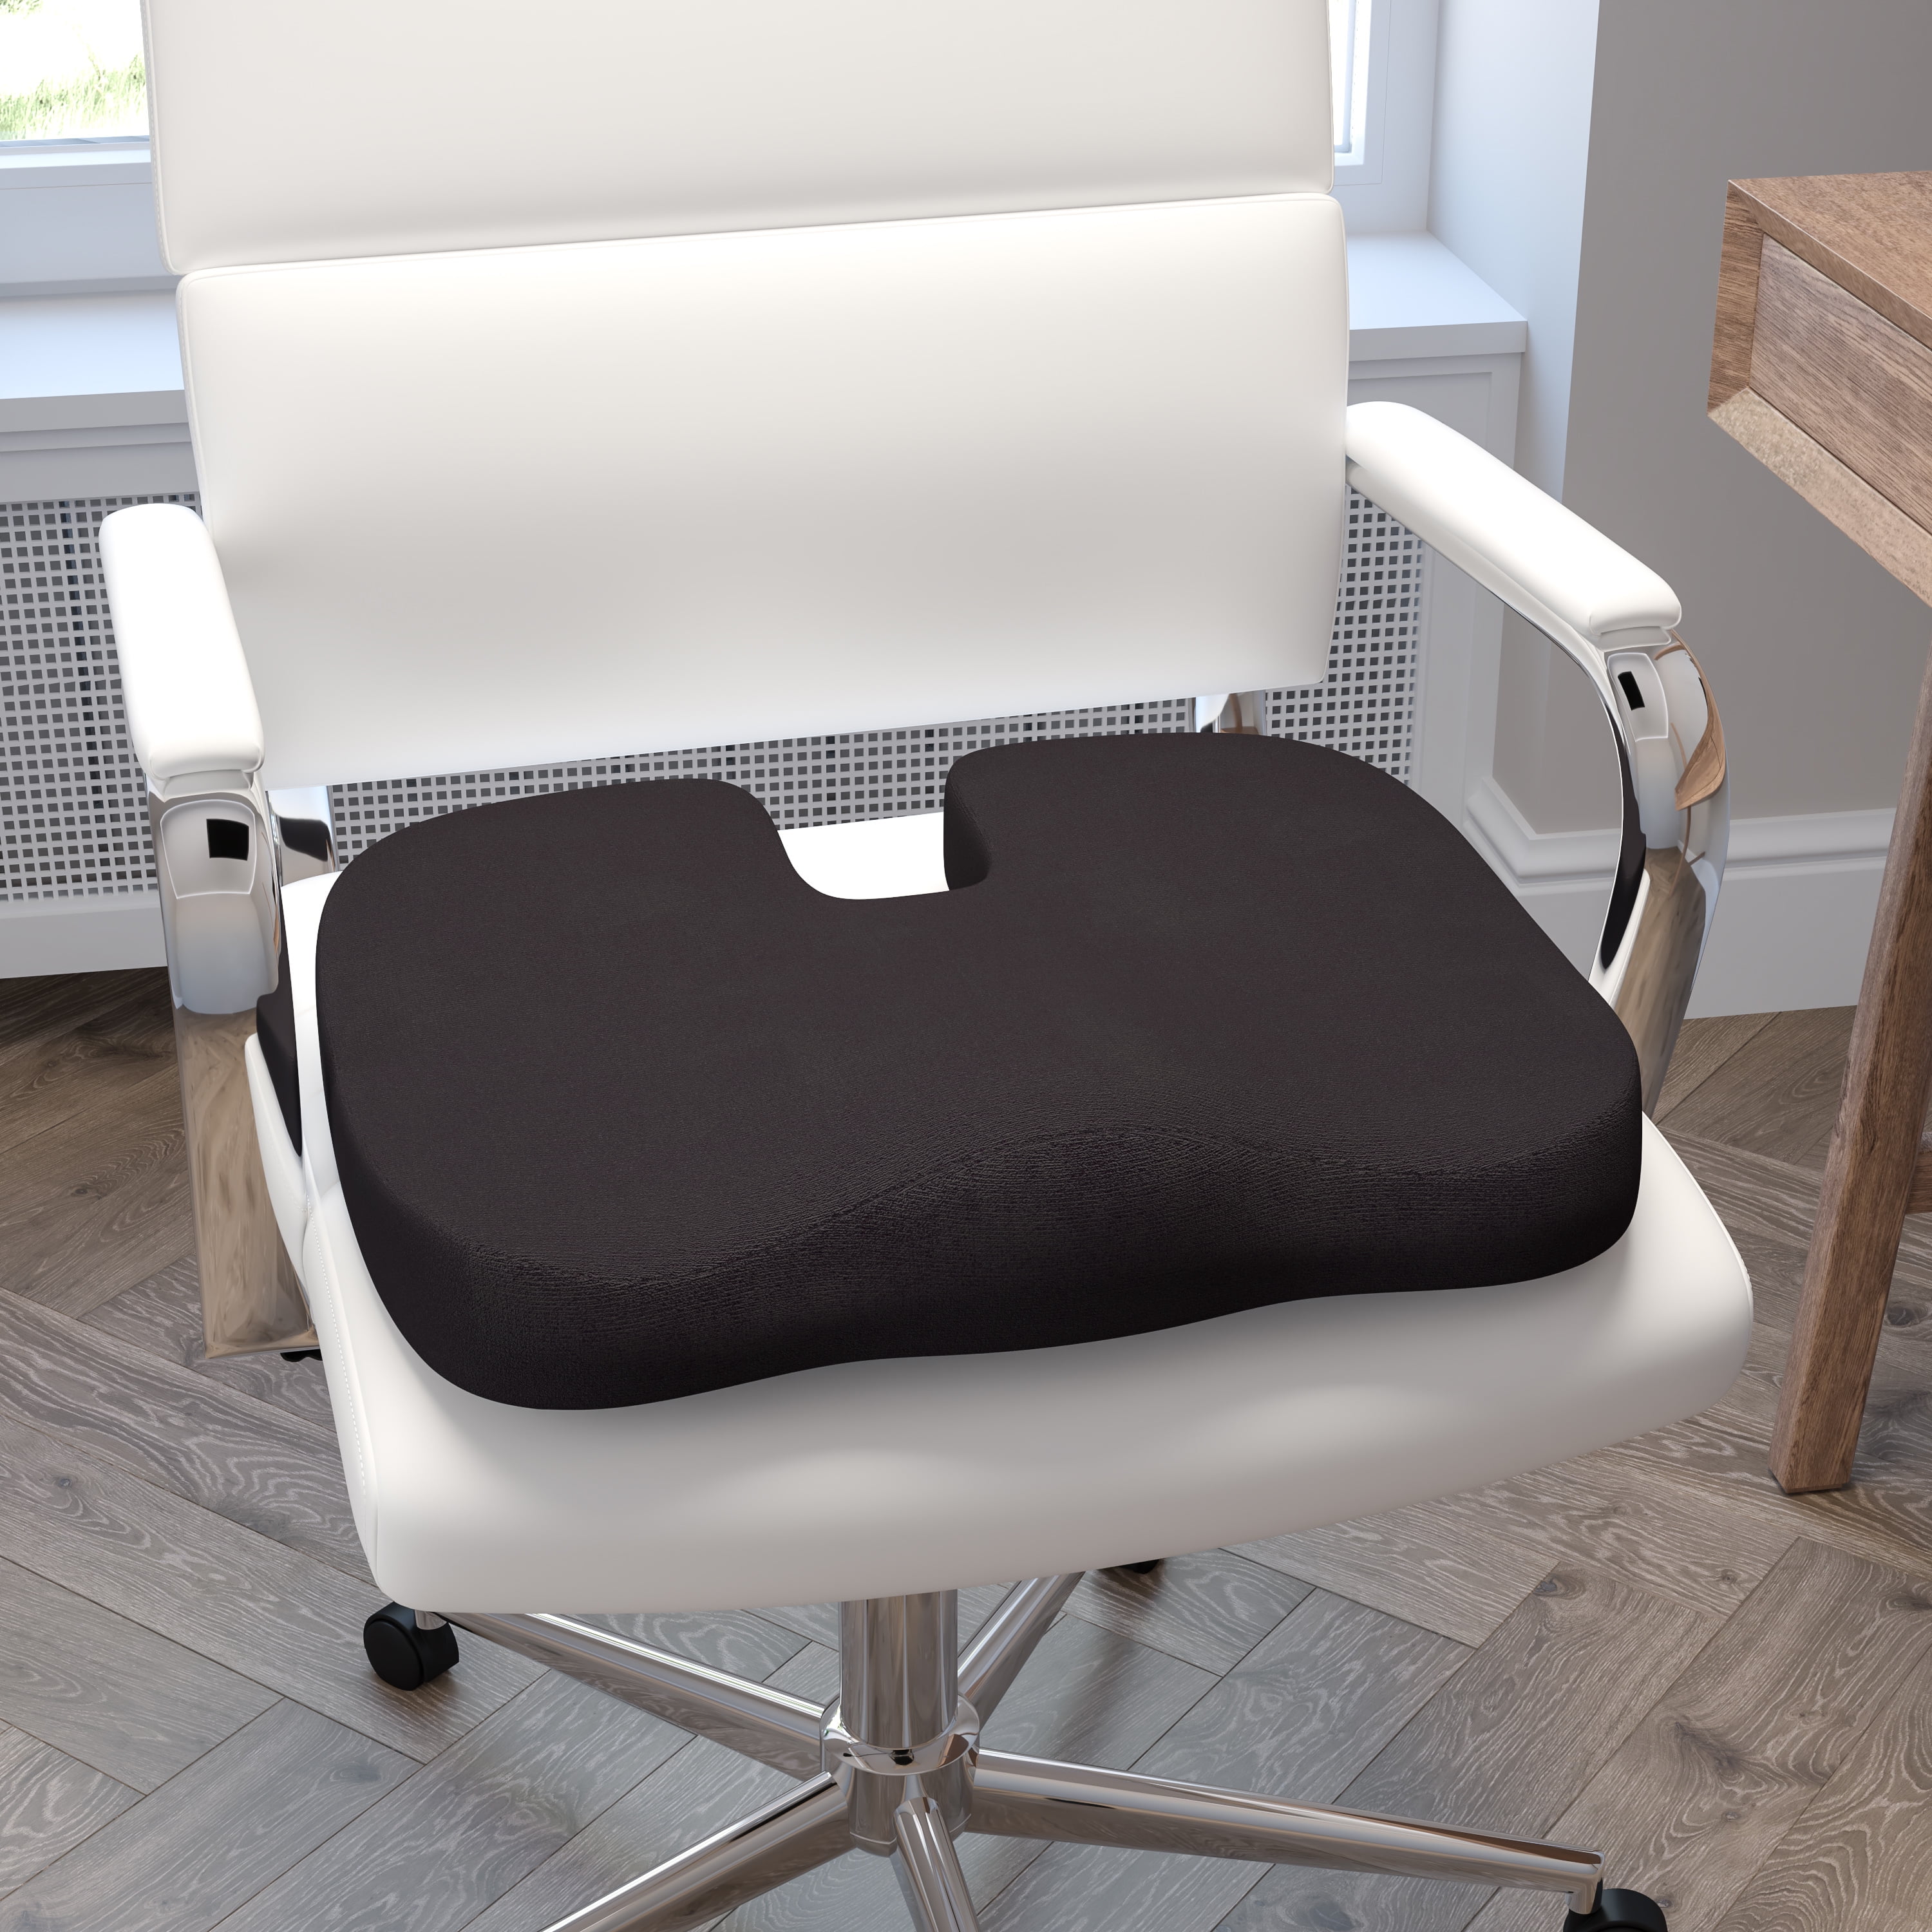 CYLEN Home Office Seat Cushion - Comfort Memory Foam Chair With